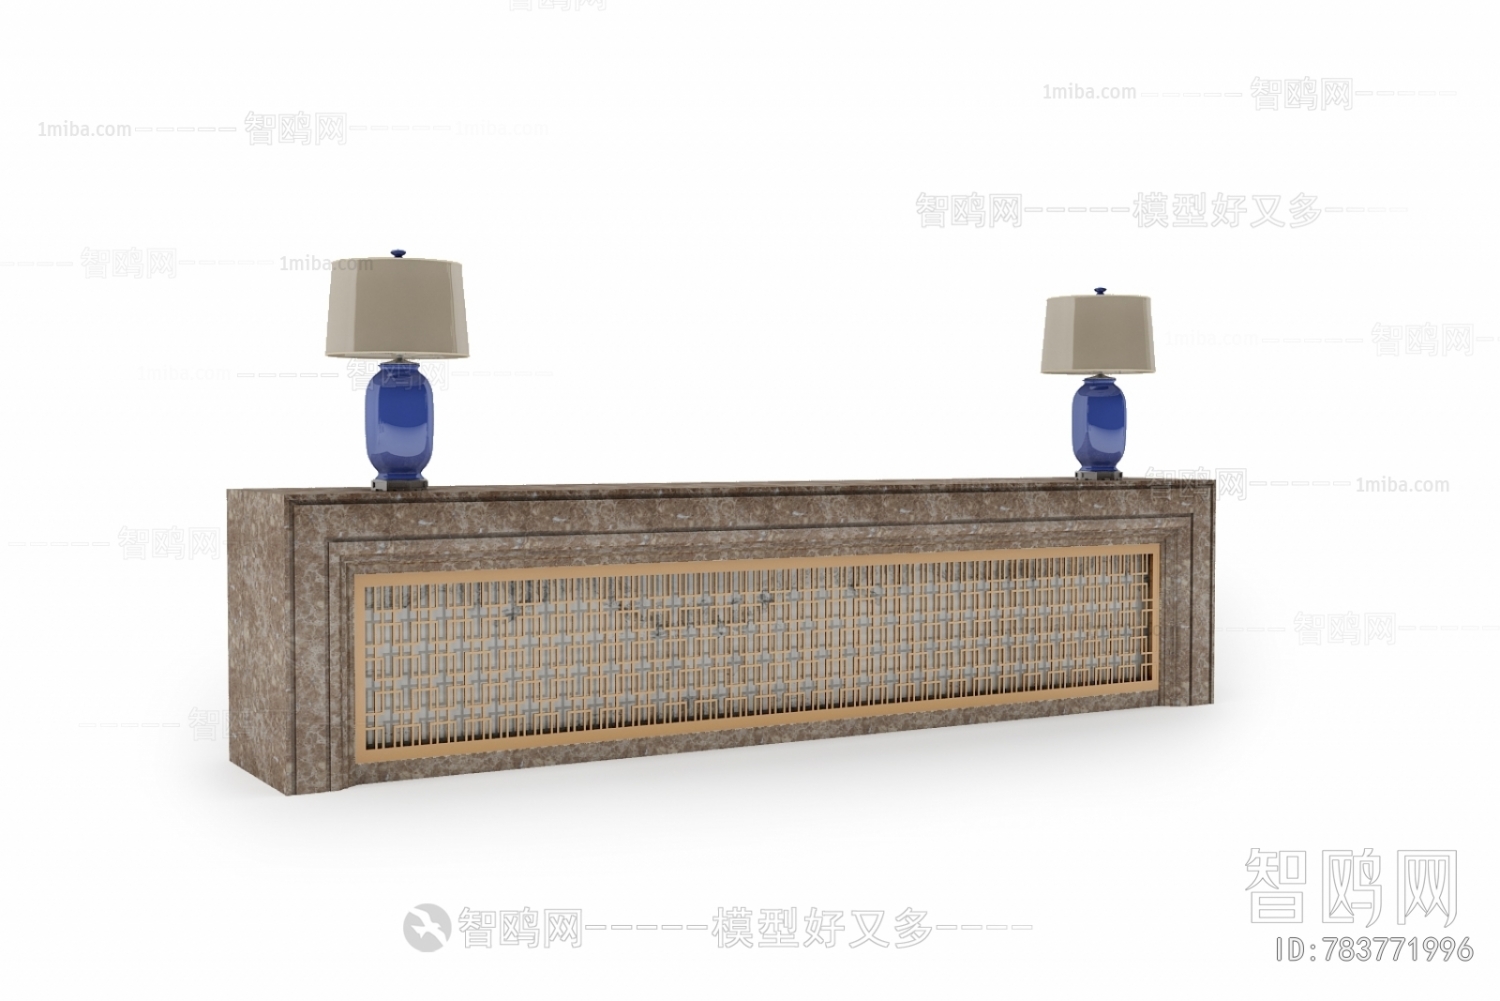 Chinese Style Reception Desk